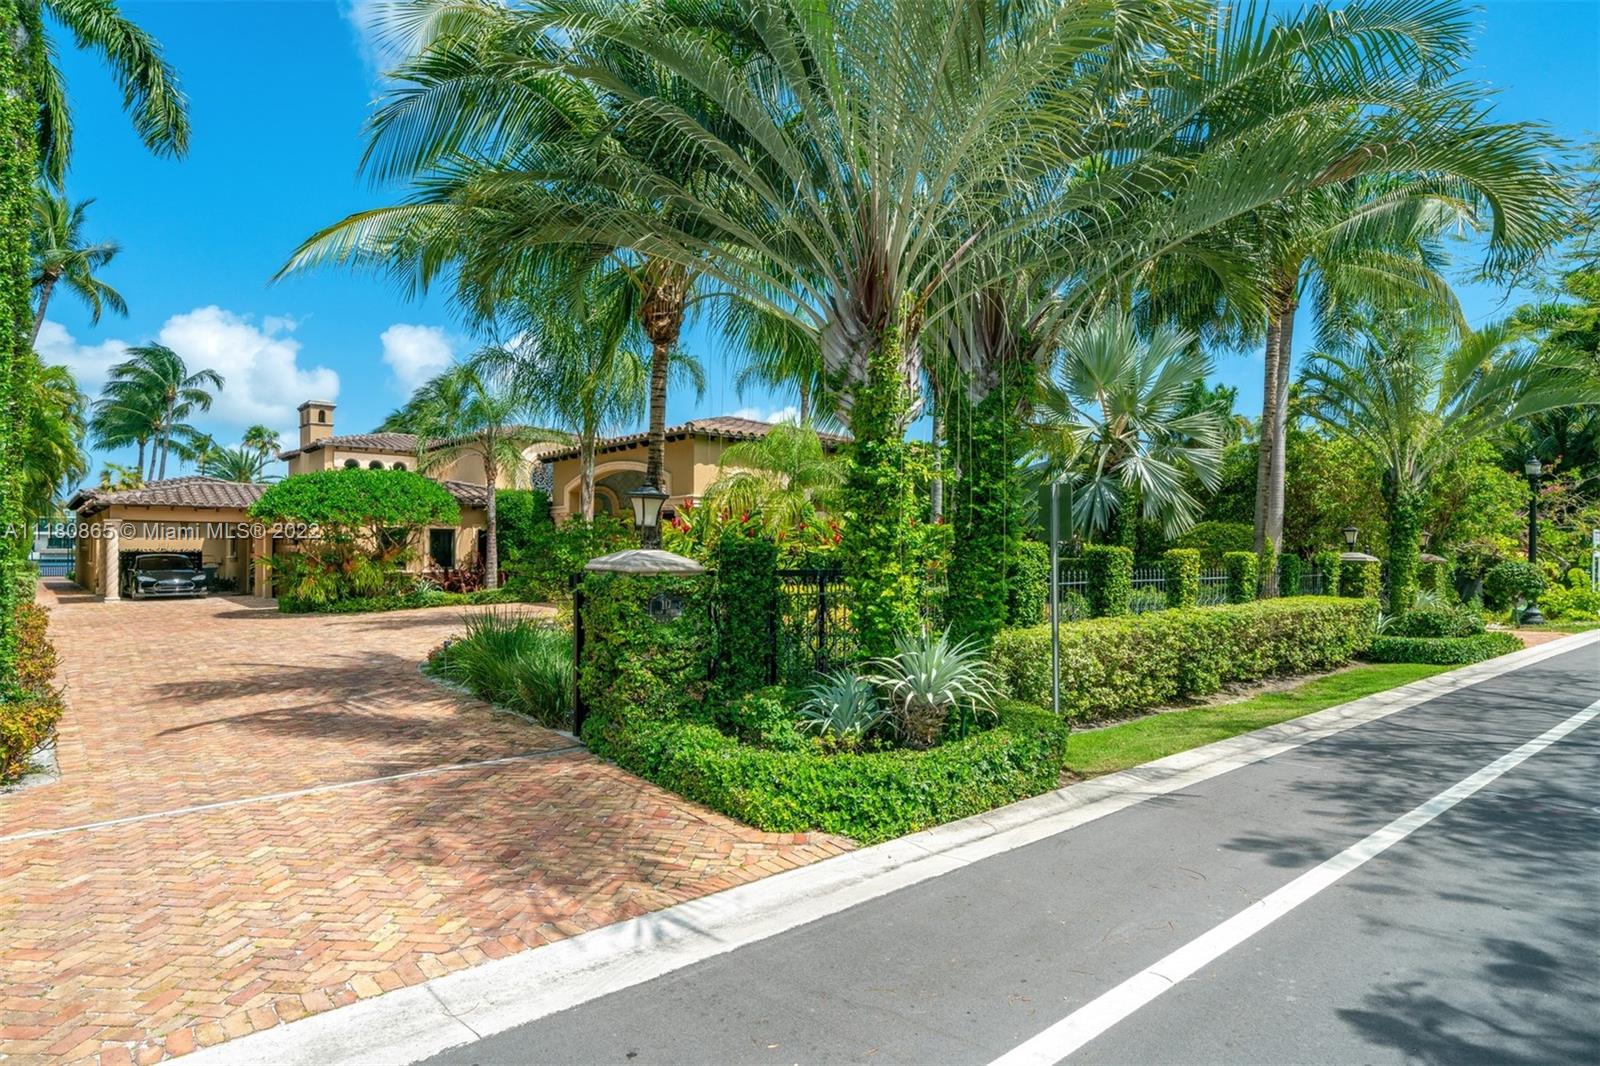 Very special Mediterranean waterfront estate on exclusive, guard-gated Palm Island w/100 ft of water frontage, floating dock, 2 boat slips w/lifts & no bridges to the ocean. 30,000 SF of lushly manicured landscaping surround the home. Totally rebuilt in 1998. 6BR/6.5BA w/wrought iron gated entry opening to a trompe-l'oeil painted porte-cochère & dramatic 35’ entry vestibule w/water views. Exquisite artisan details abound throughout. Enjoy indoor/outdoor living & entertaining from light-filled rooms opening onto covered terraces overlooking a one-of-a-kind tiled pool & waterway. All rooms have voluminous ceilings including living room & large master suite, formal dining, eat-in kitchen, gym & staff quarters. Tesla charging station. Palm Island offers a nearby community park & tennis courts.